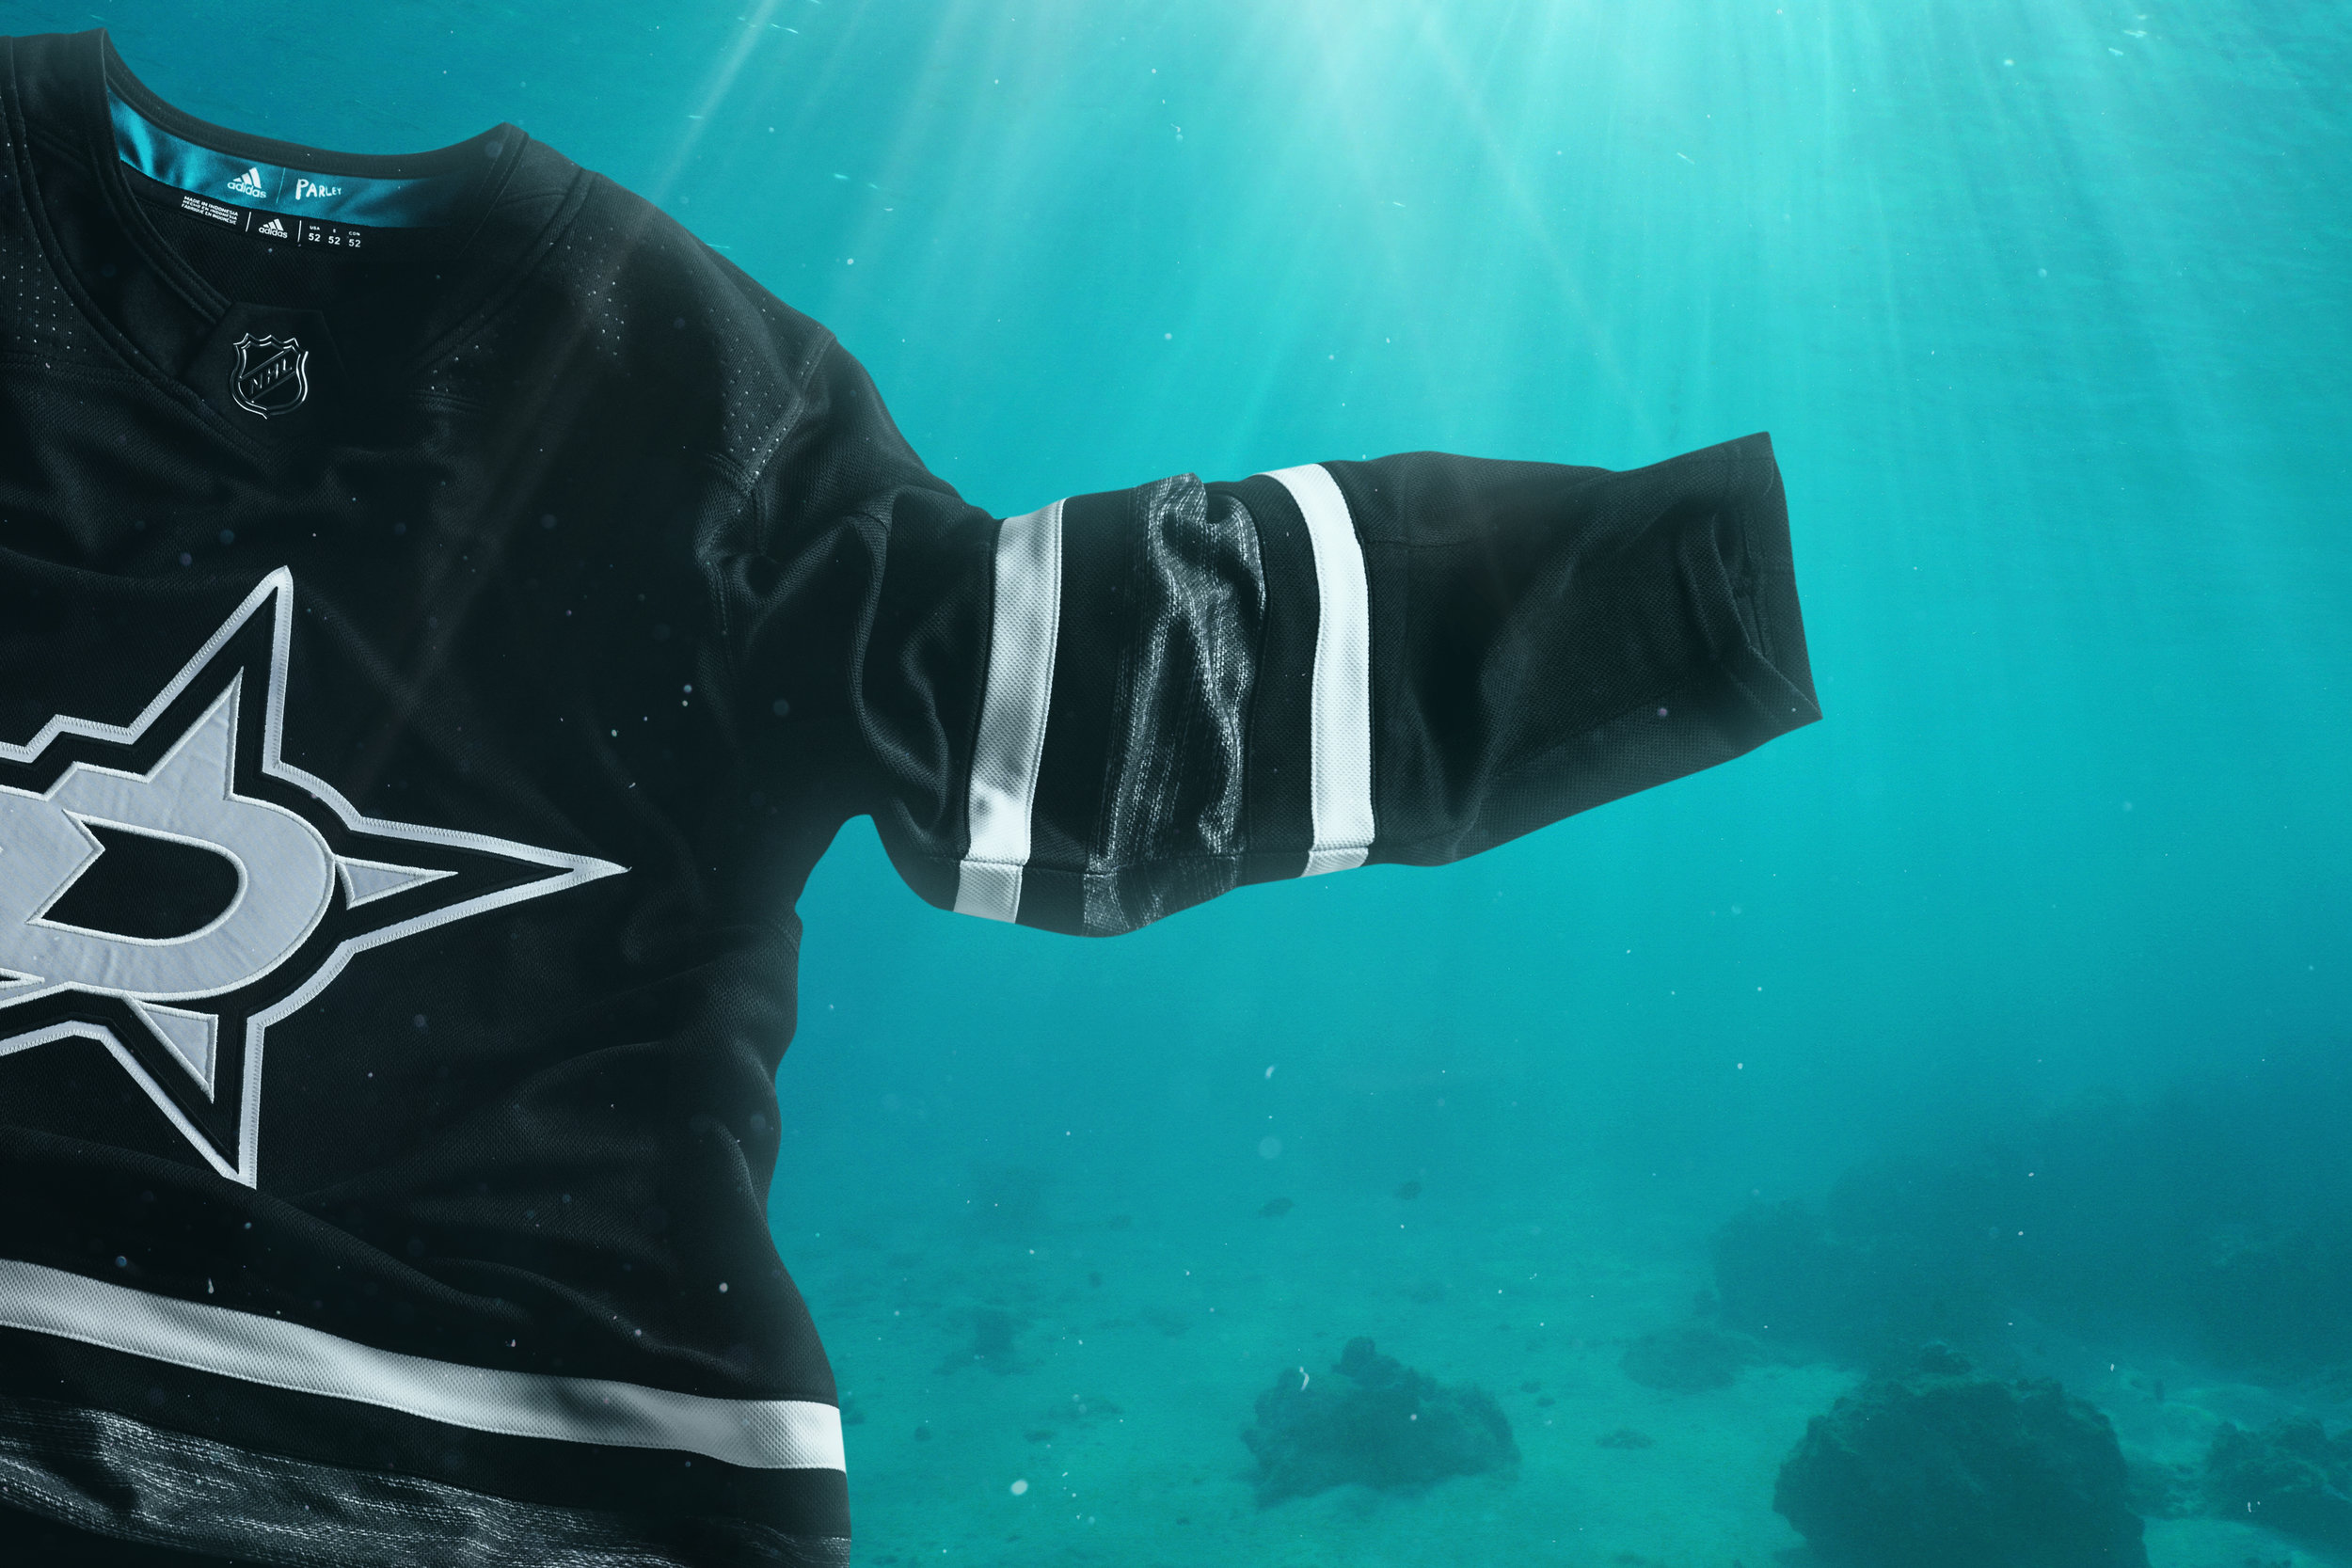 NHL x Parley: Bringing the oceans to the ice — Parley